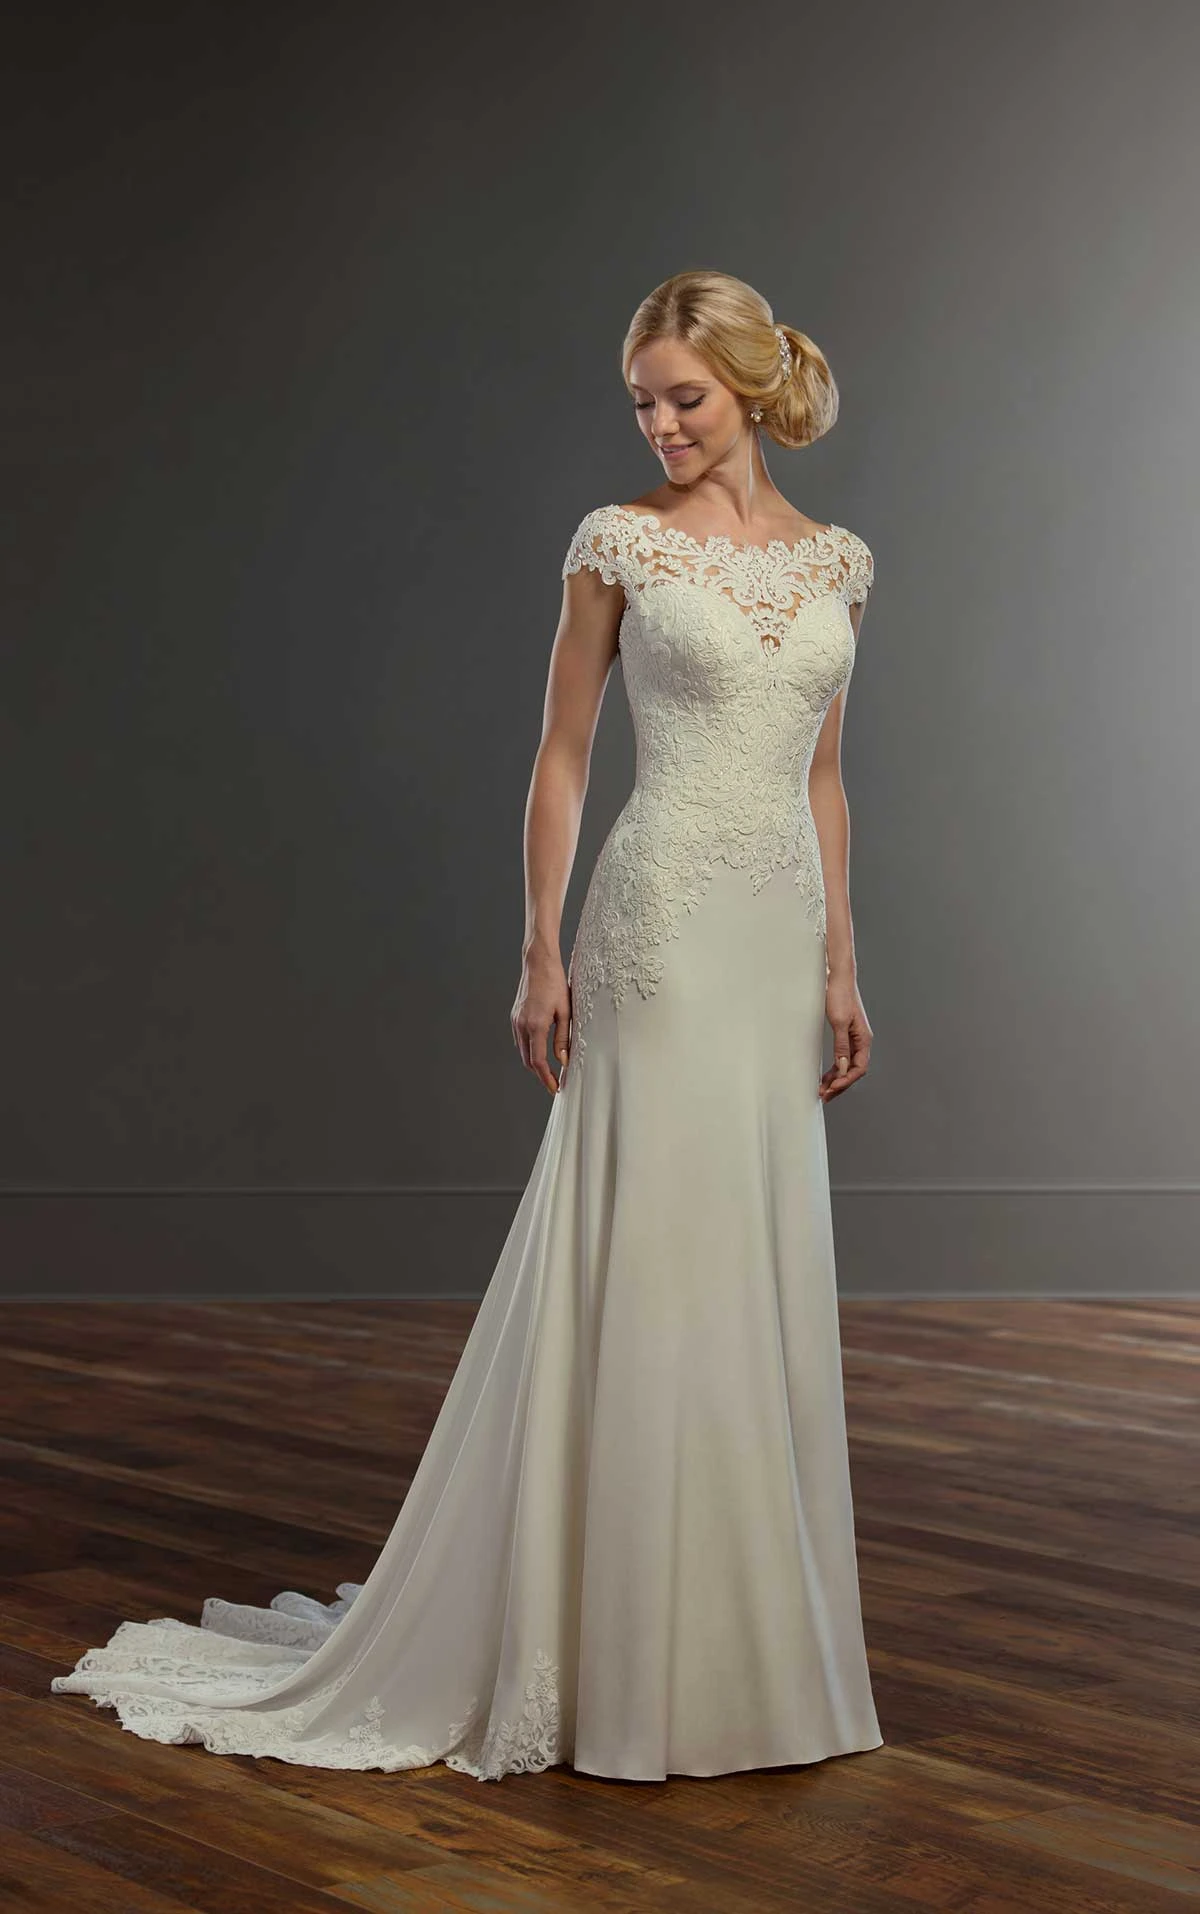 Romantic Lace and Chiffon Bridal Gown with Cap Sleeves